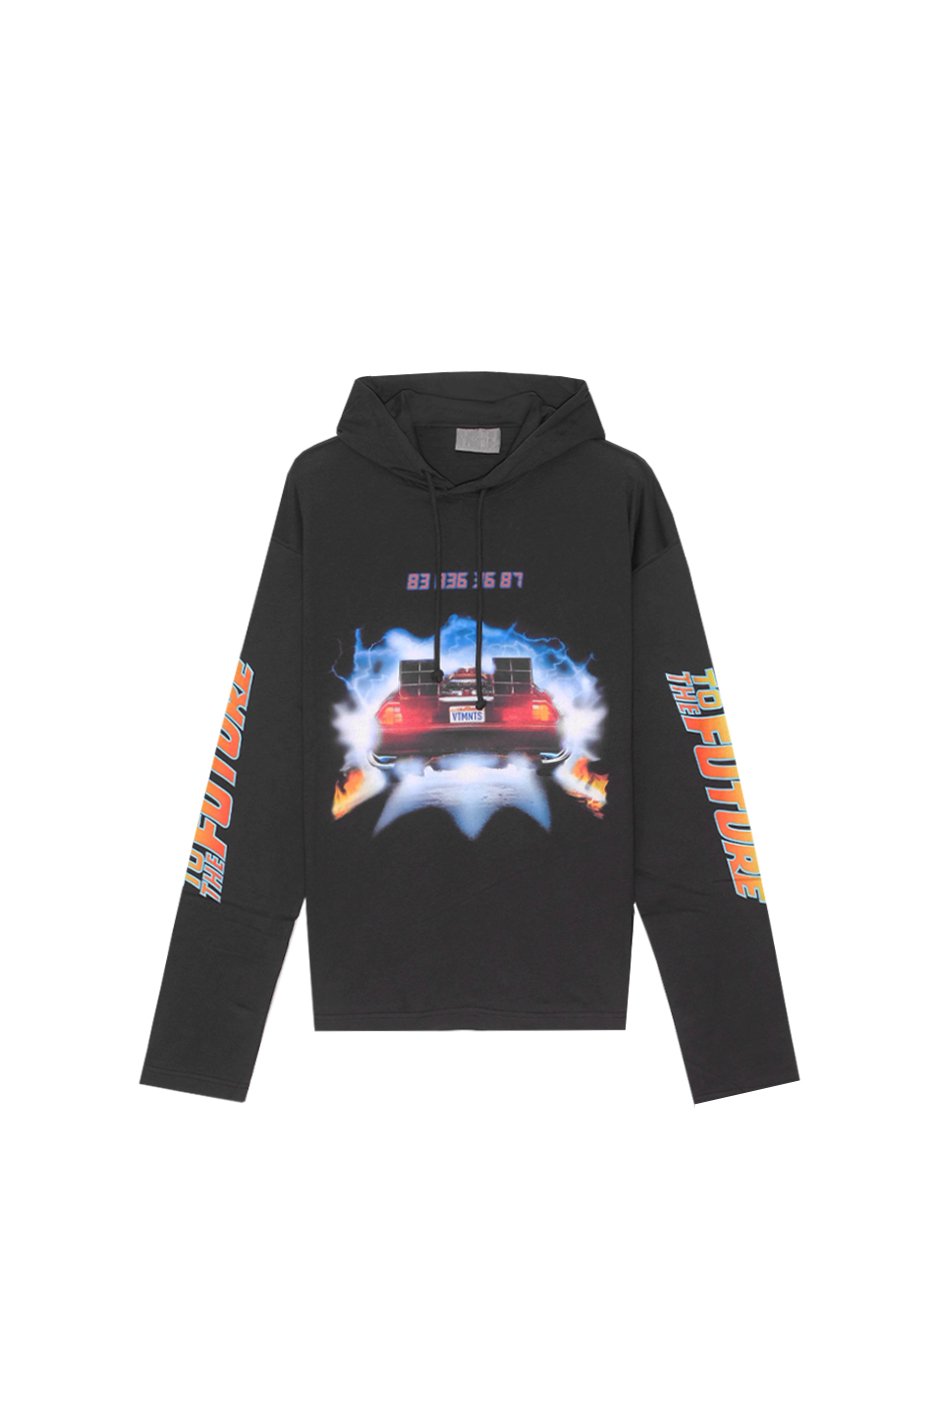 BACK TO THE FUTURE JERSEY HOODIE